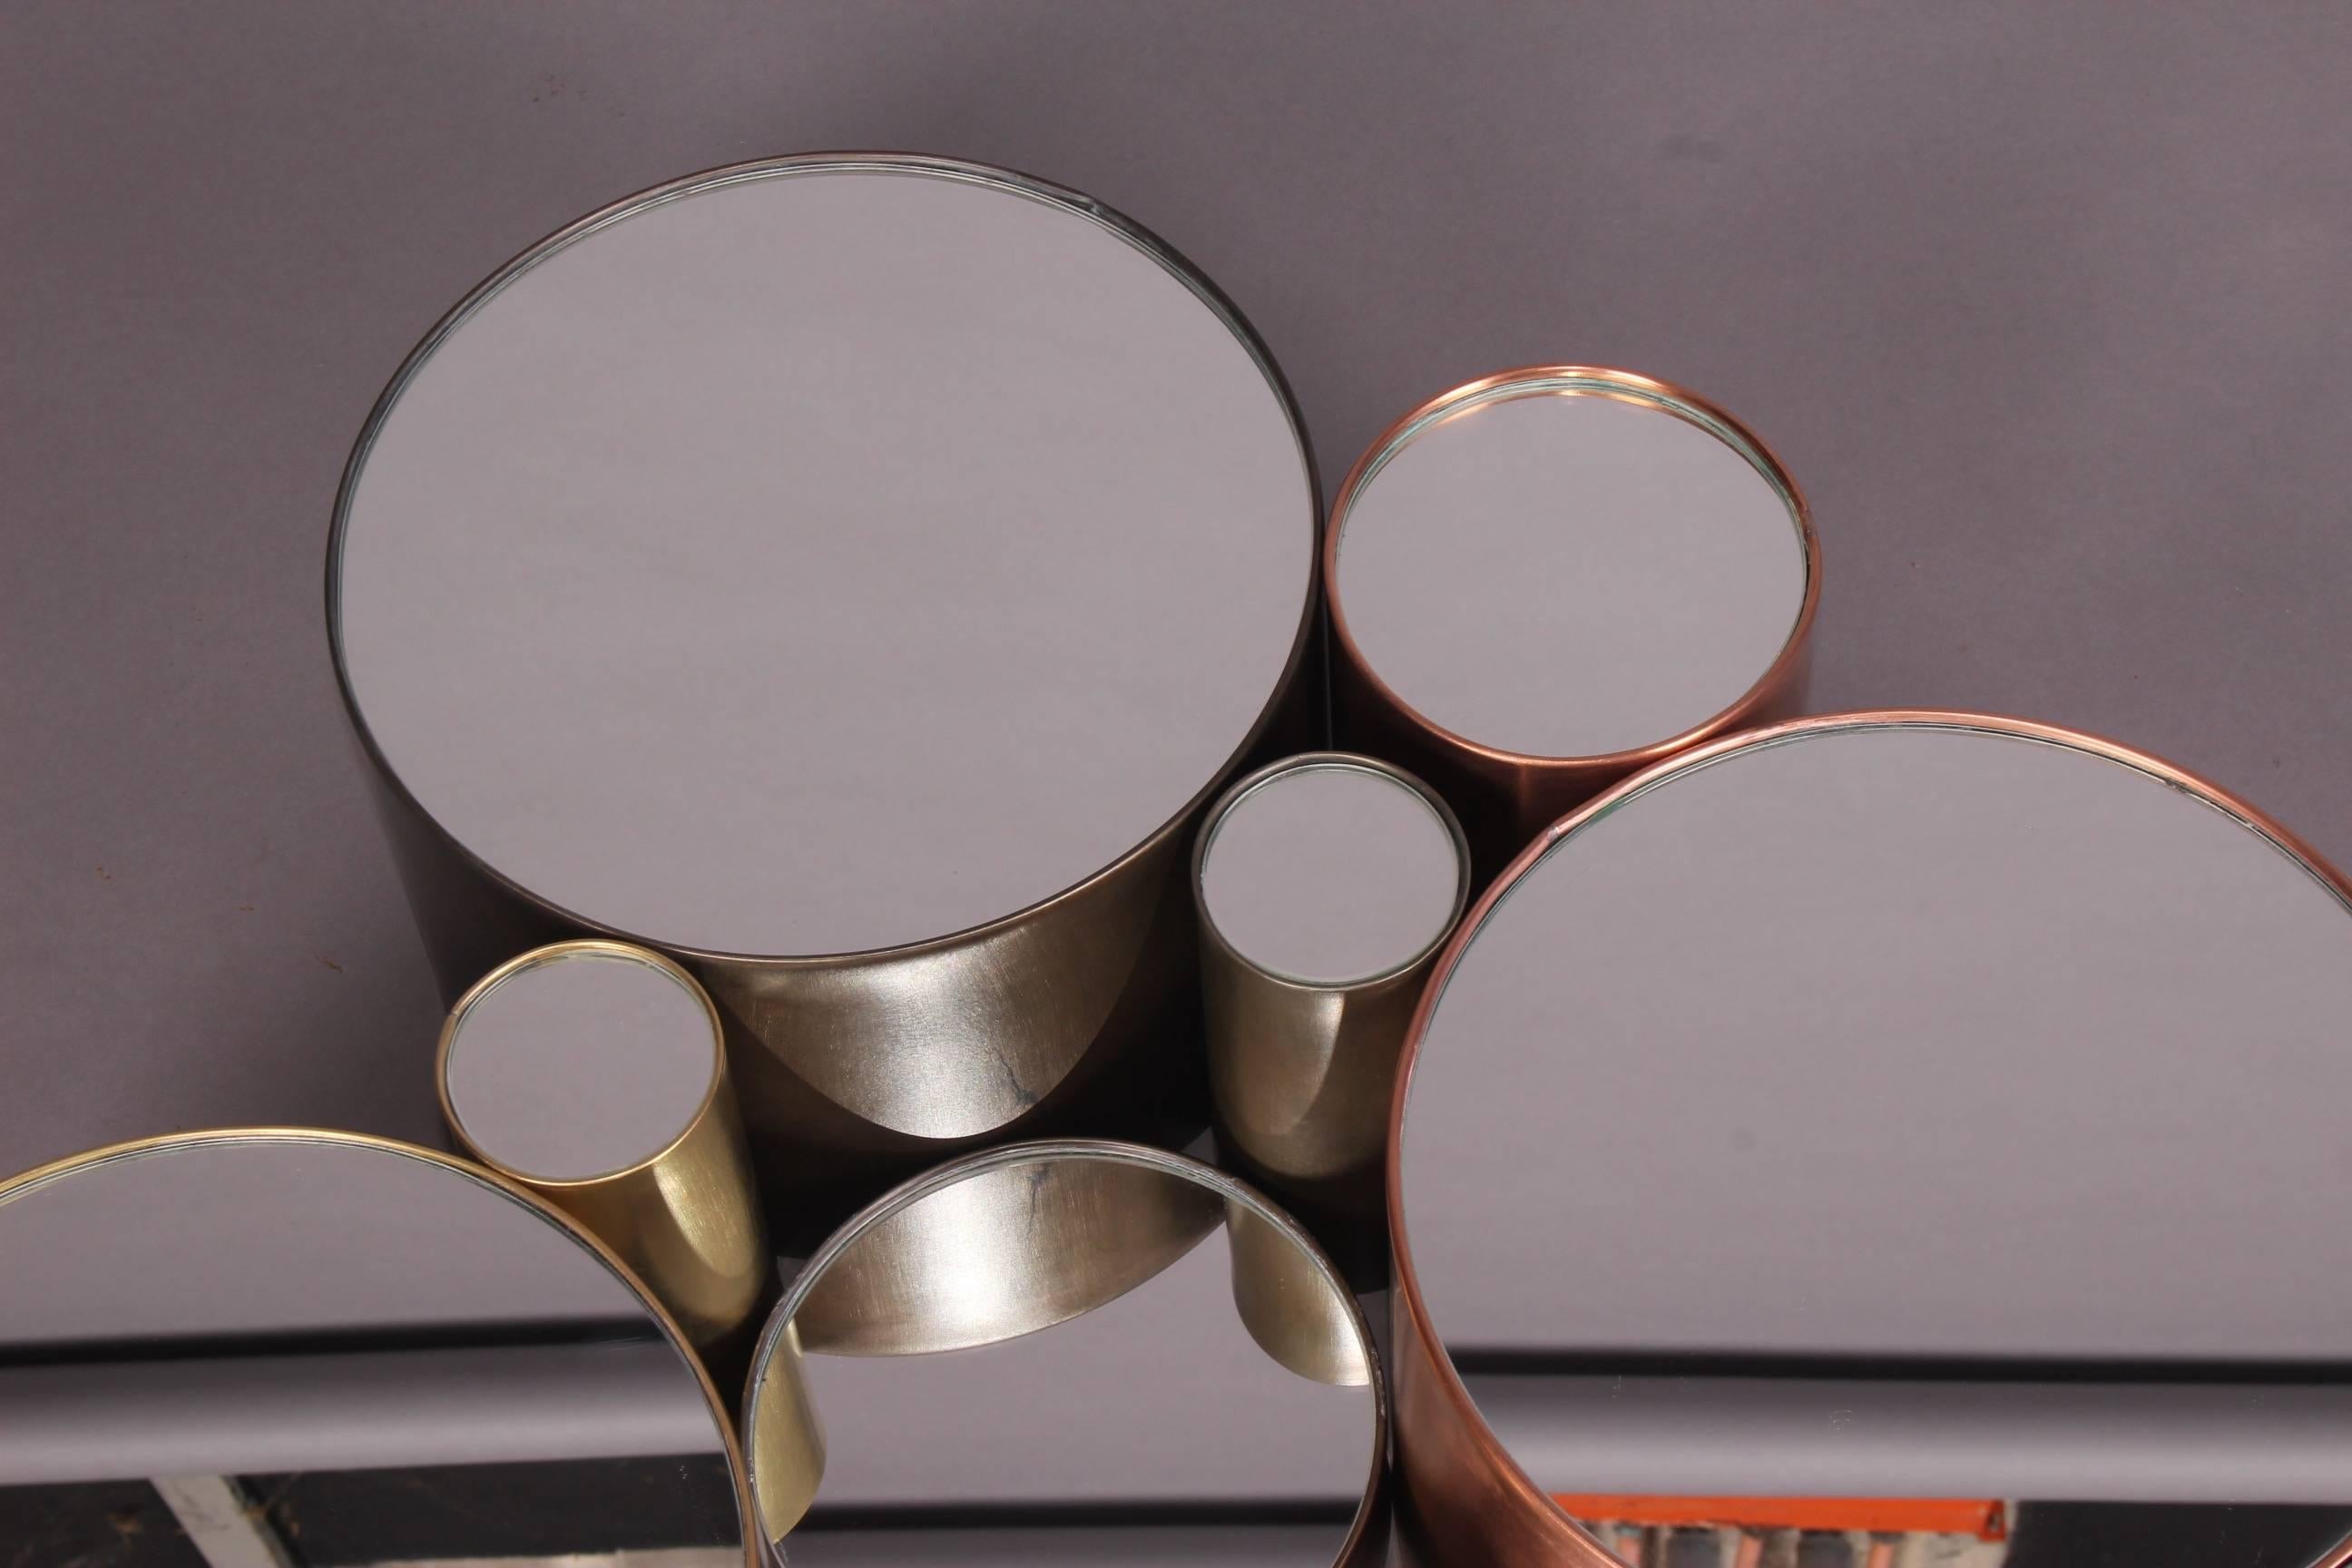 Contemporary Copper, Brass or Zinc Wall Mirror Made to Order by Tic Tac